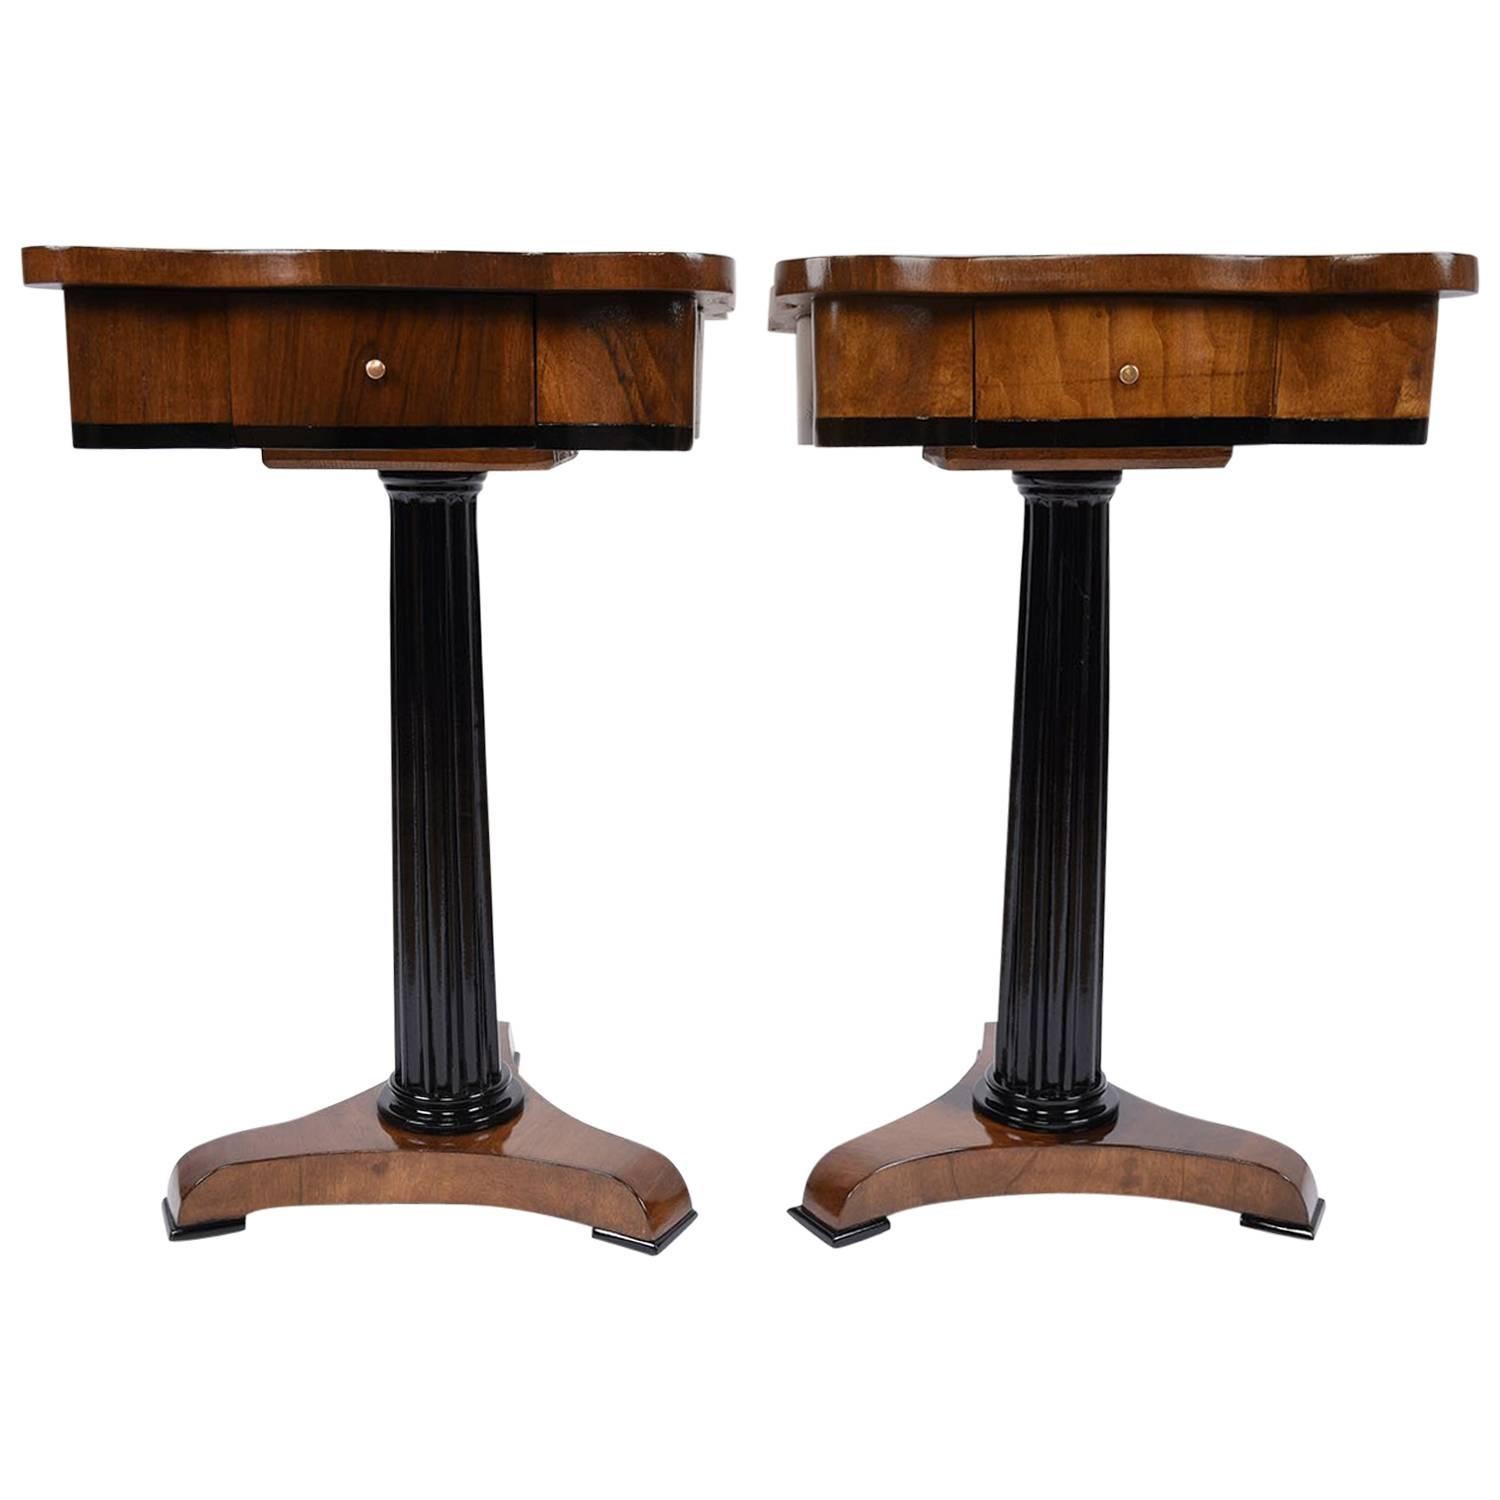 Pair of Empire-Style End Tables